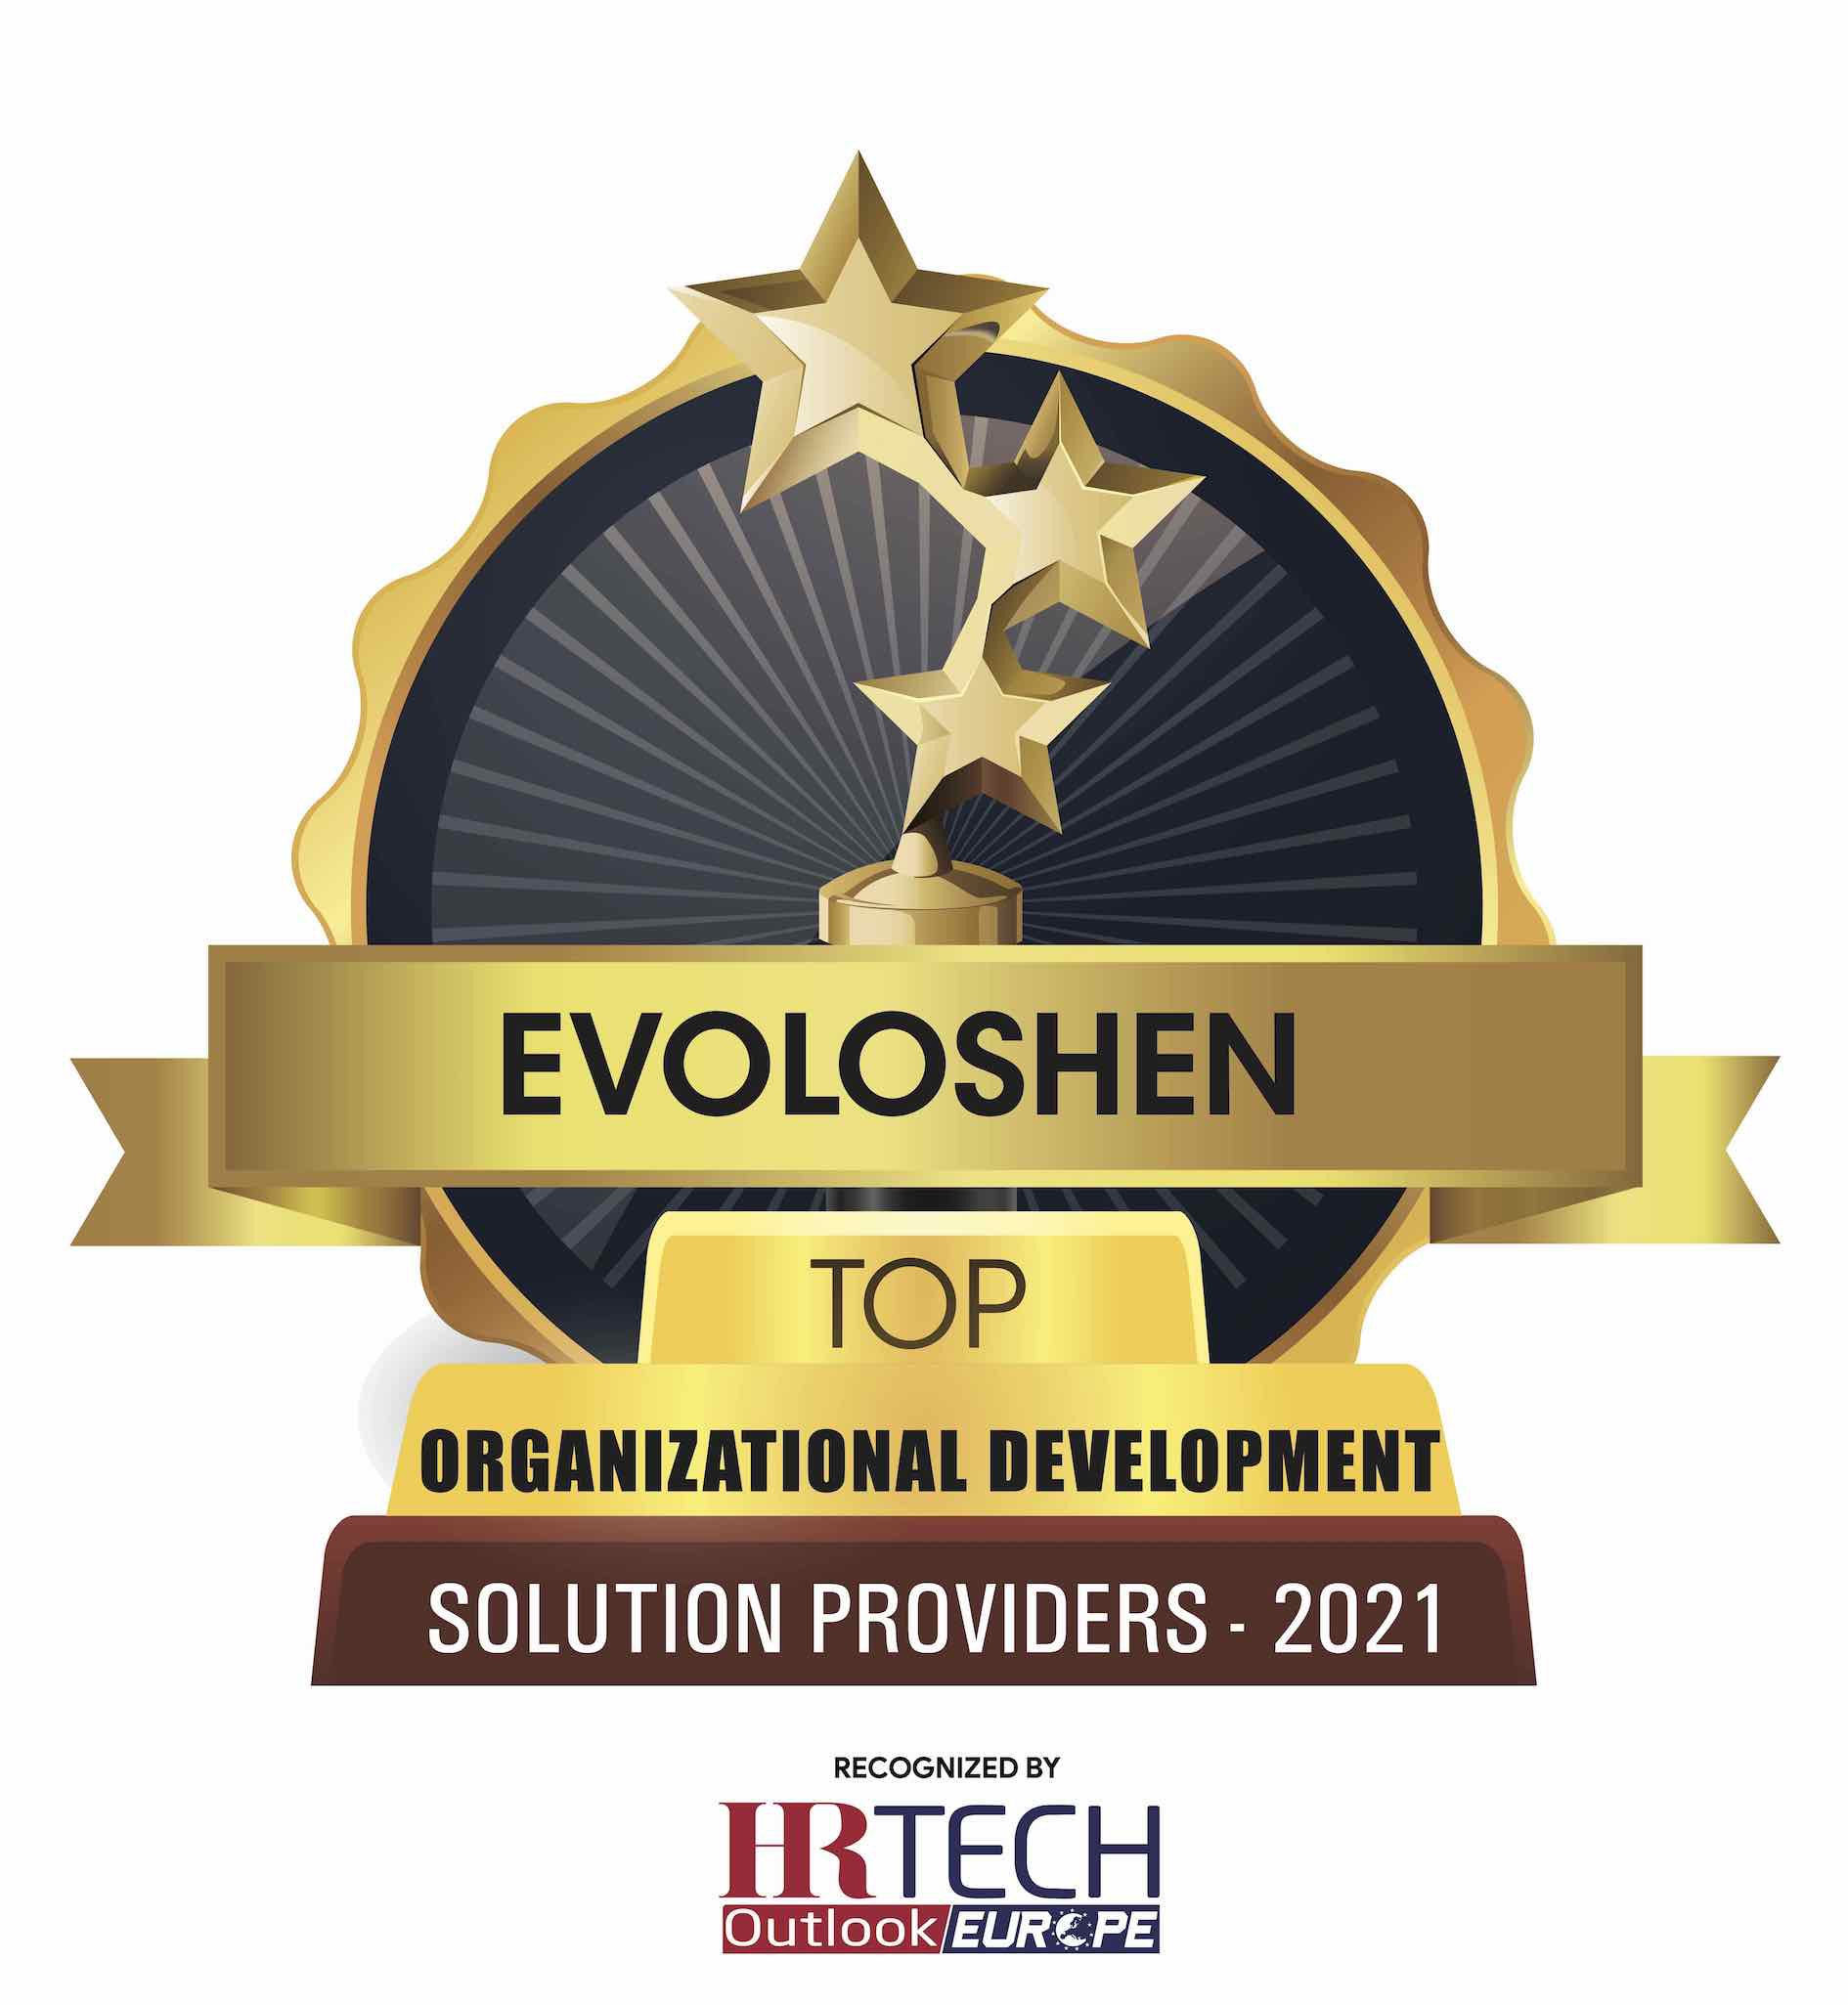 Evoloshen has been recognized as one of the Top 10 Organizational Development Companies in Europe by HR Tech Outlook.